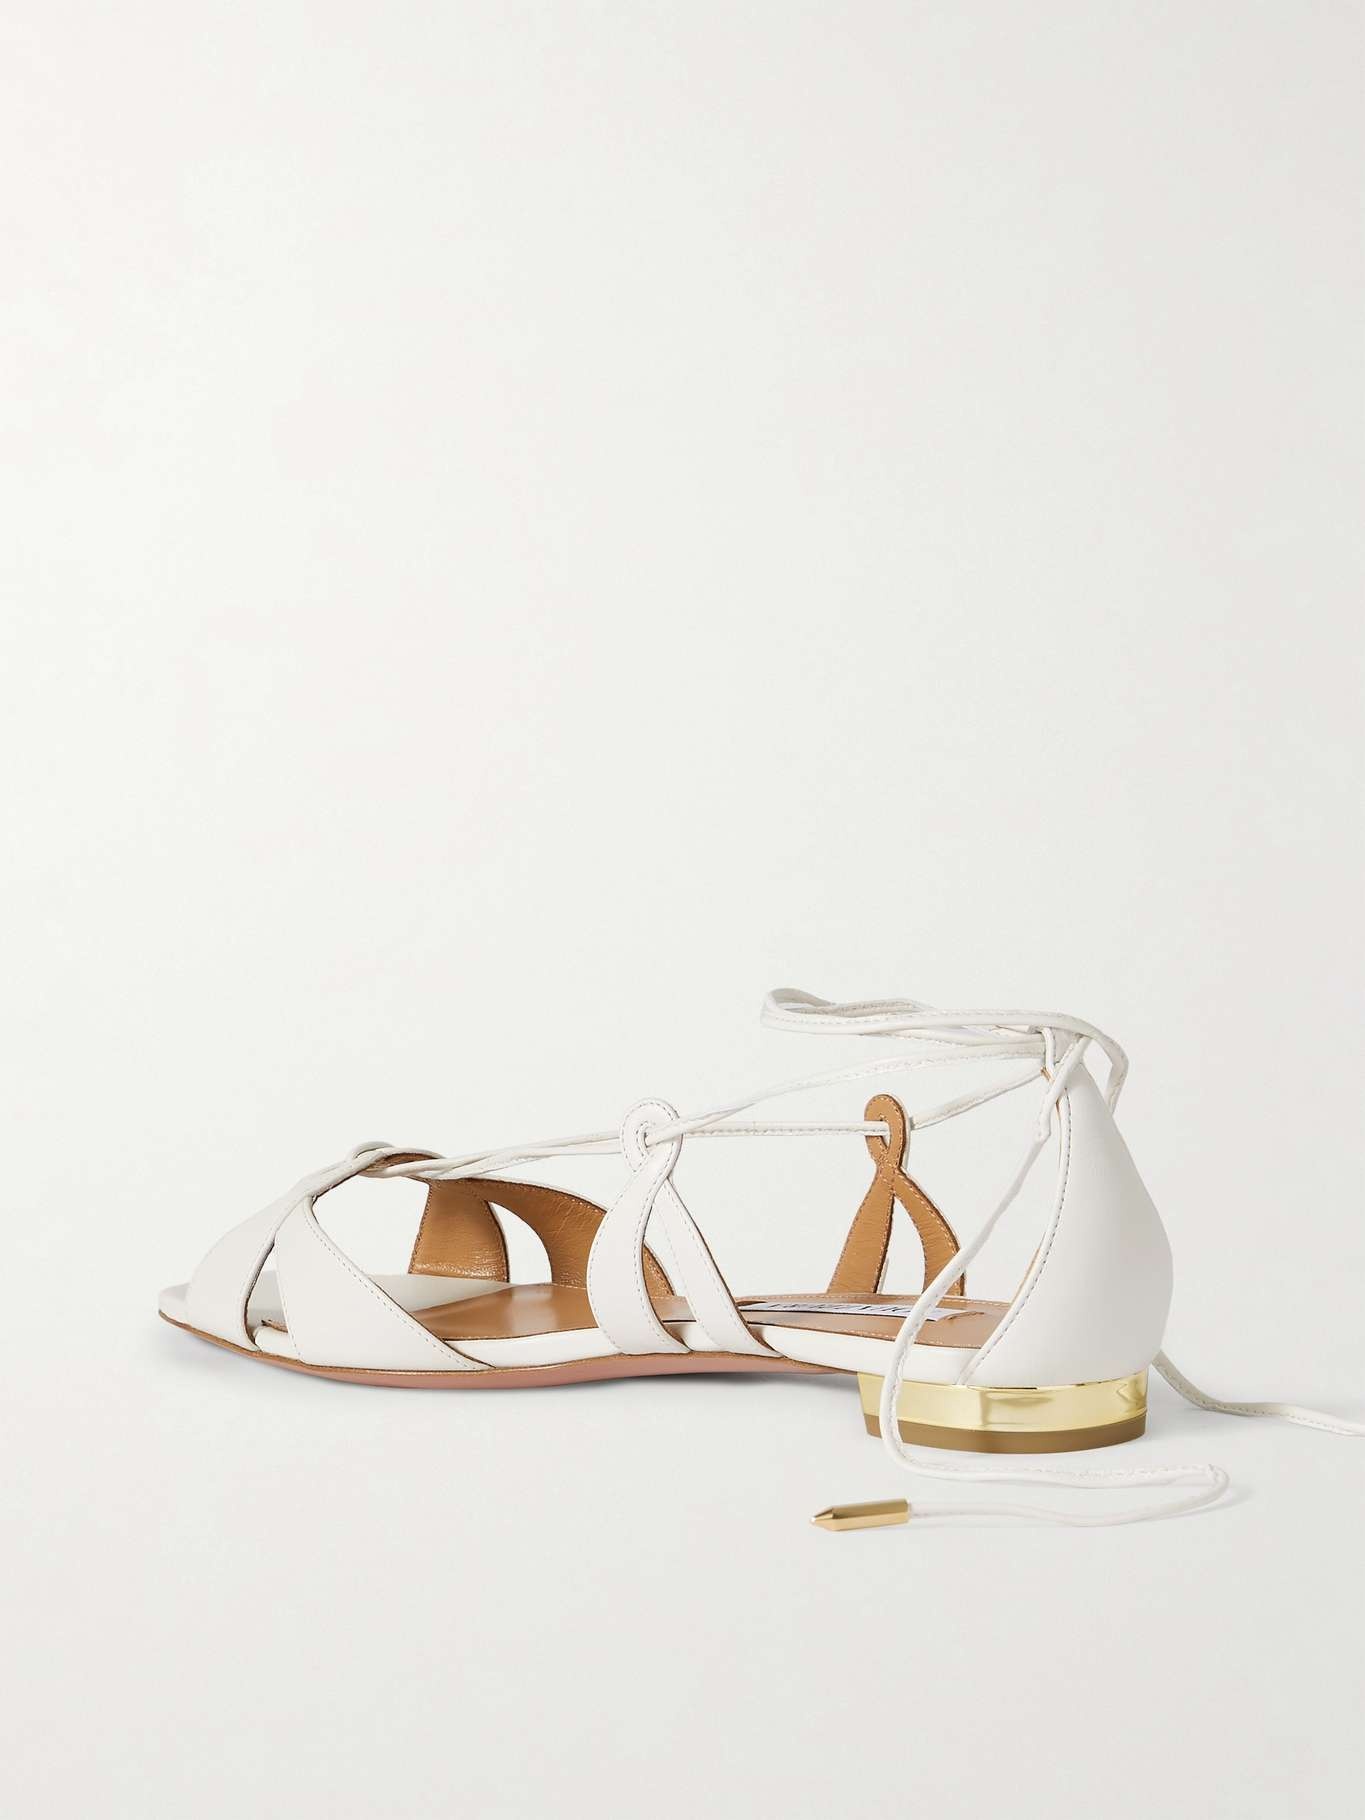 Cala di Volpe leather sandals - 3